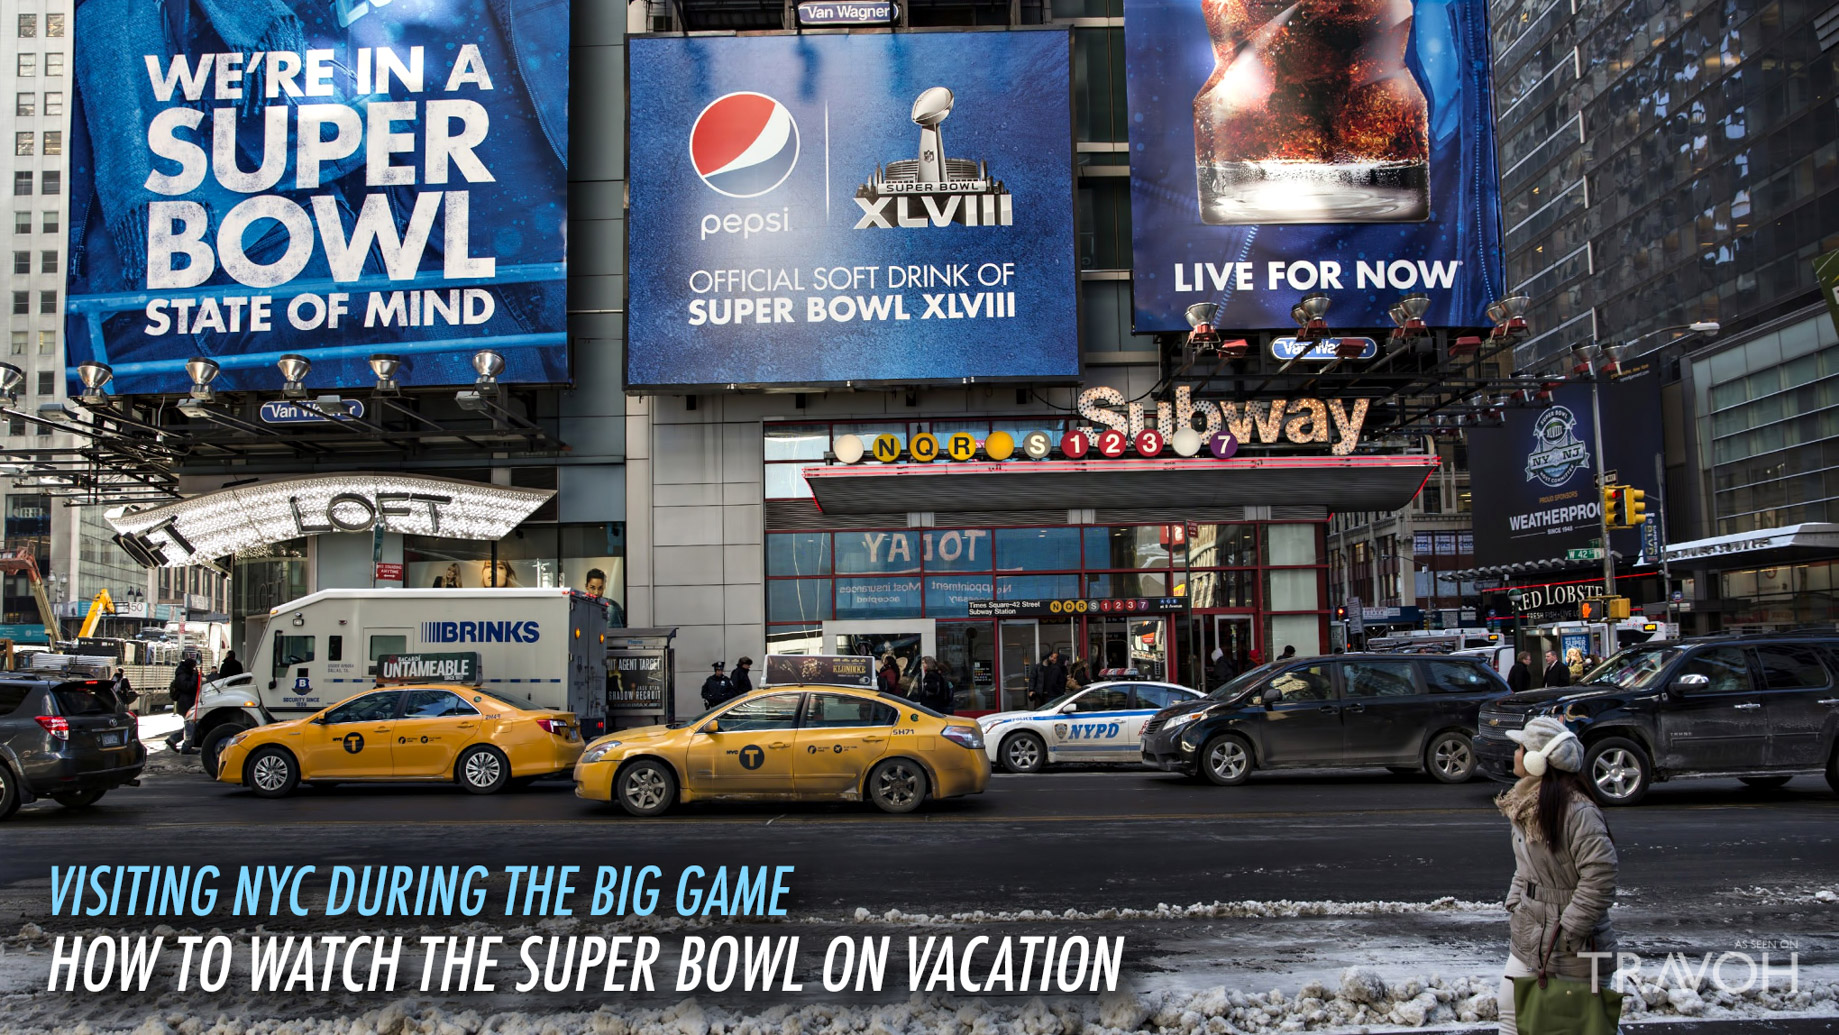 Visiting NYC During the Big Game - How to Watch the Super Bowl on Vacation